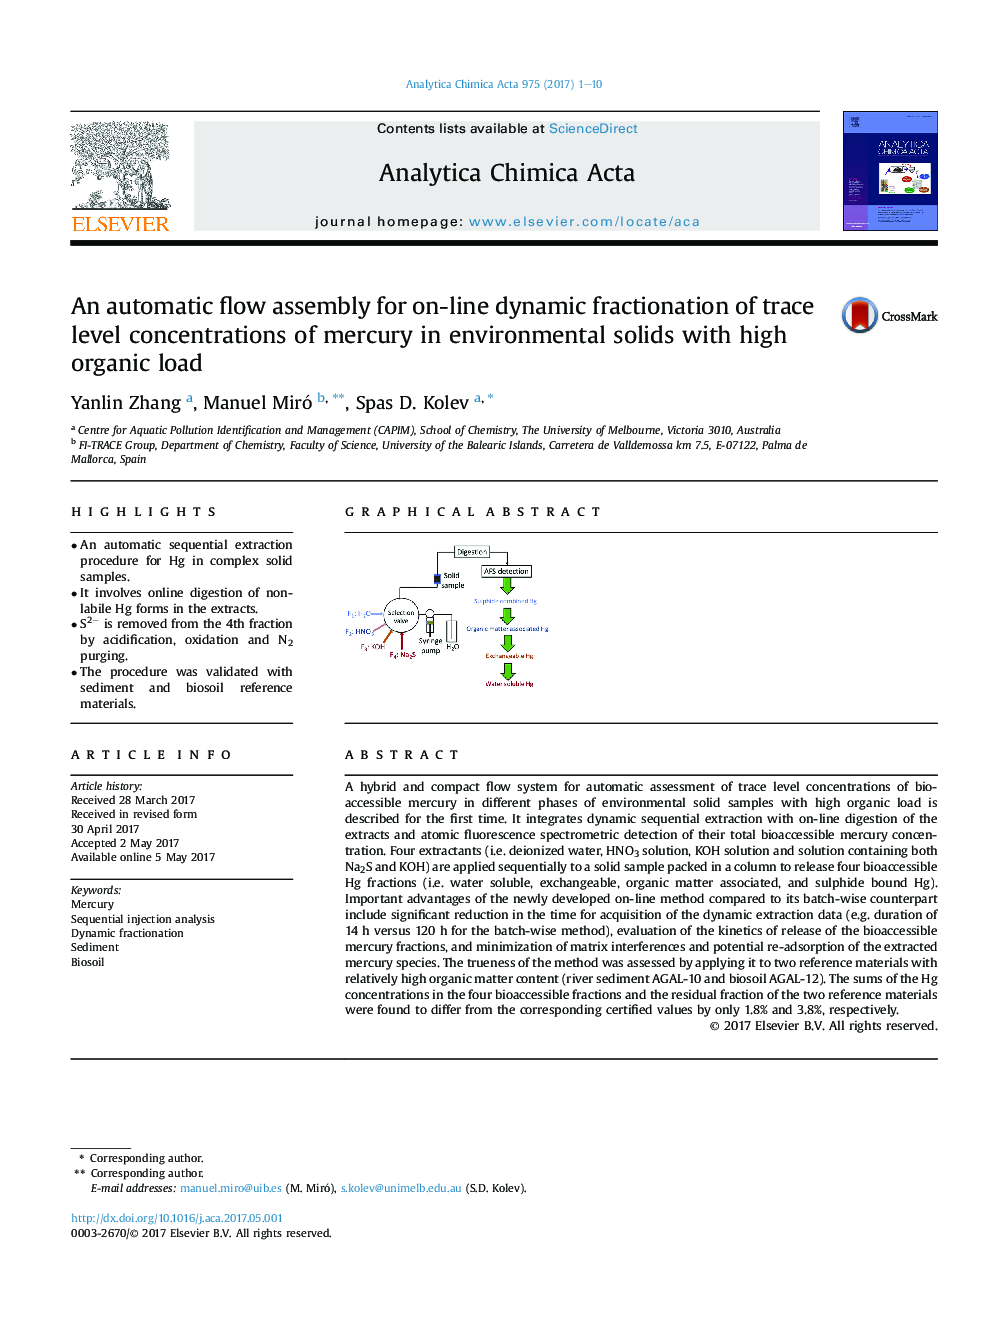 An automatic flow assembly for on-line dynamic fractionation of trace level concentrations of mercury in environmental solids with high organic load